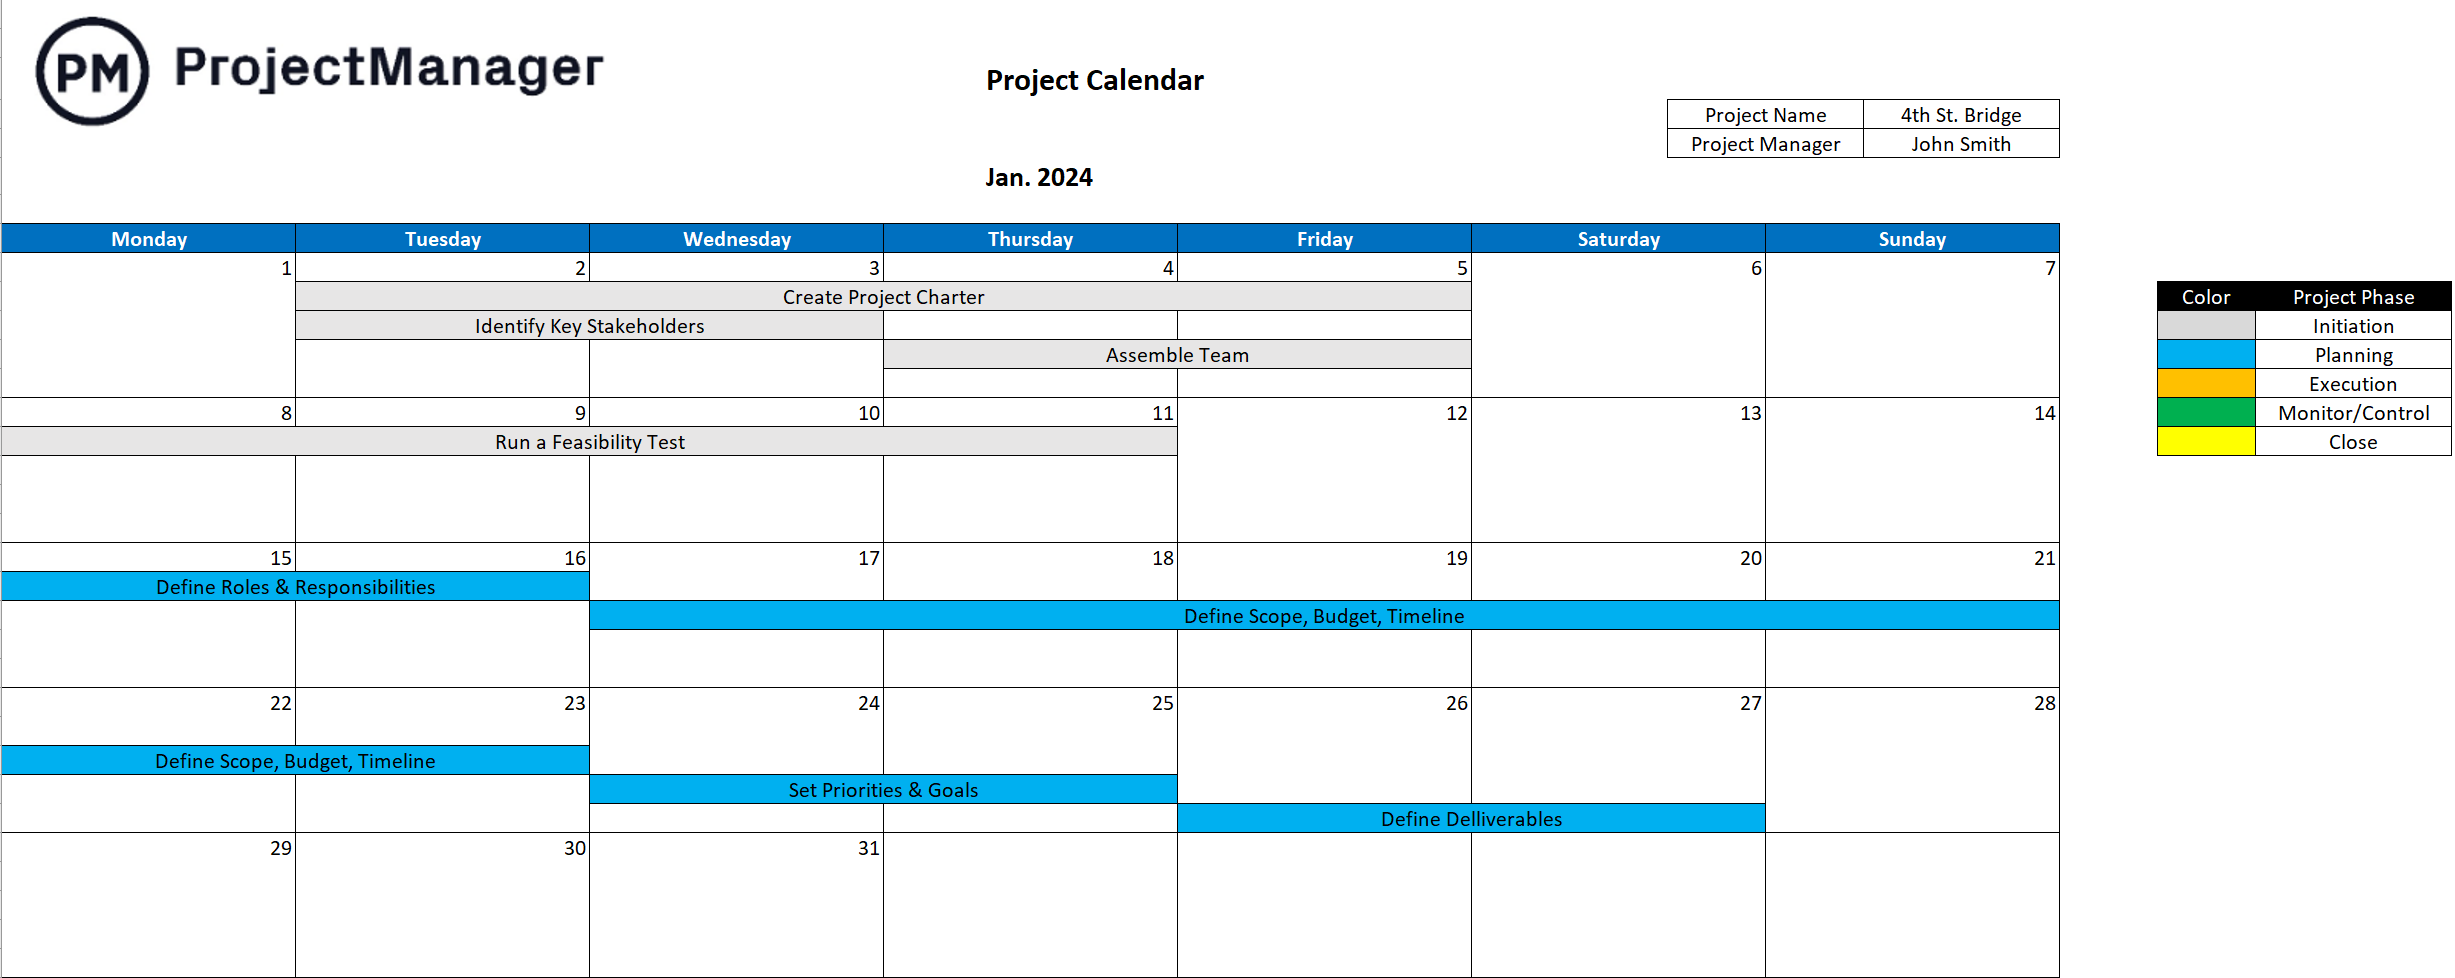 ProjectManager's free project calendar template for Excel